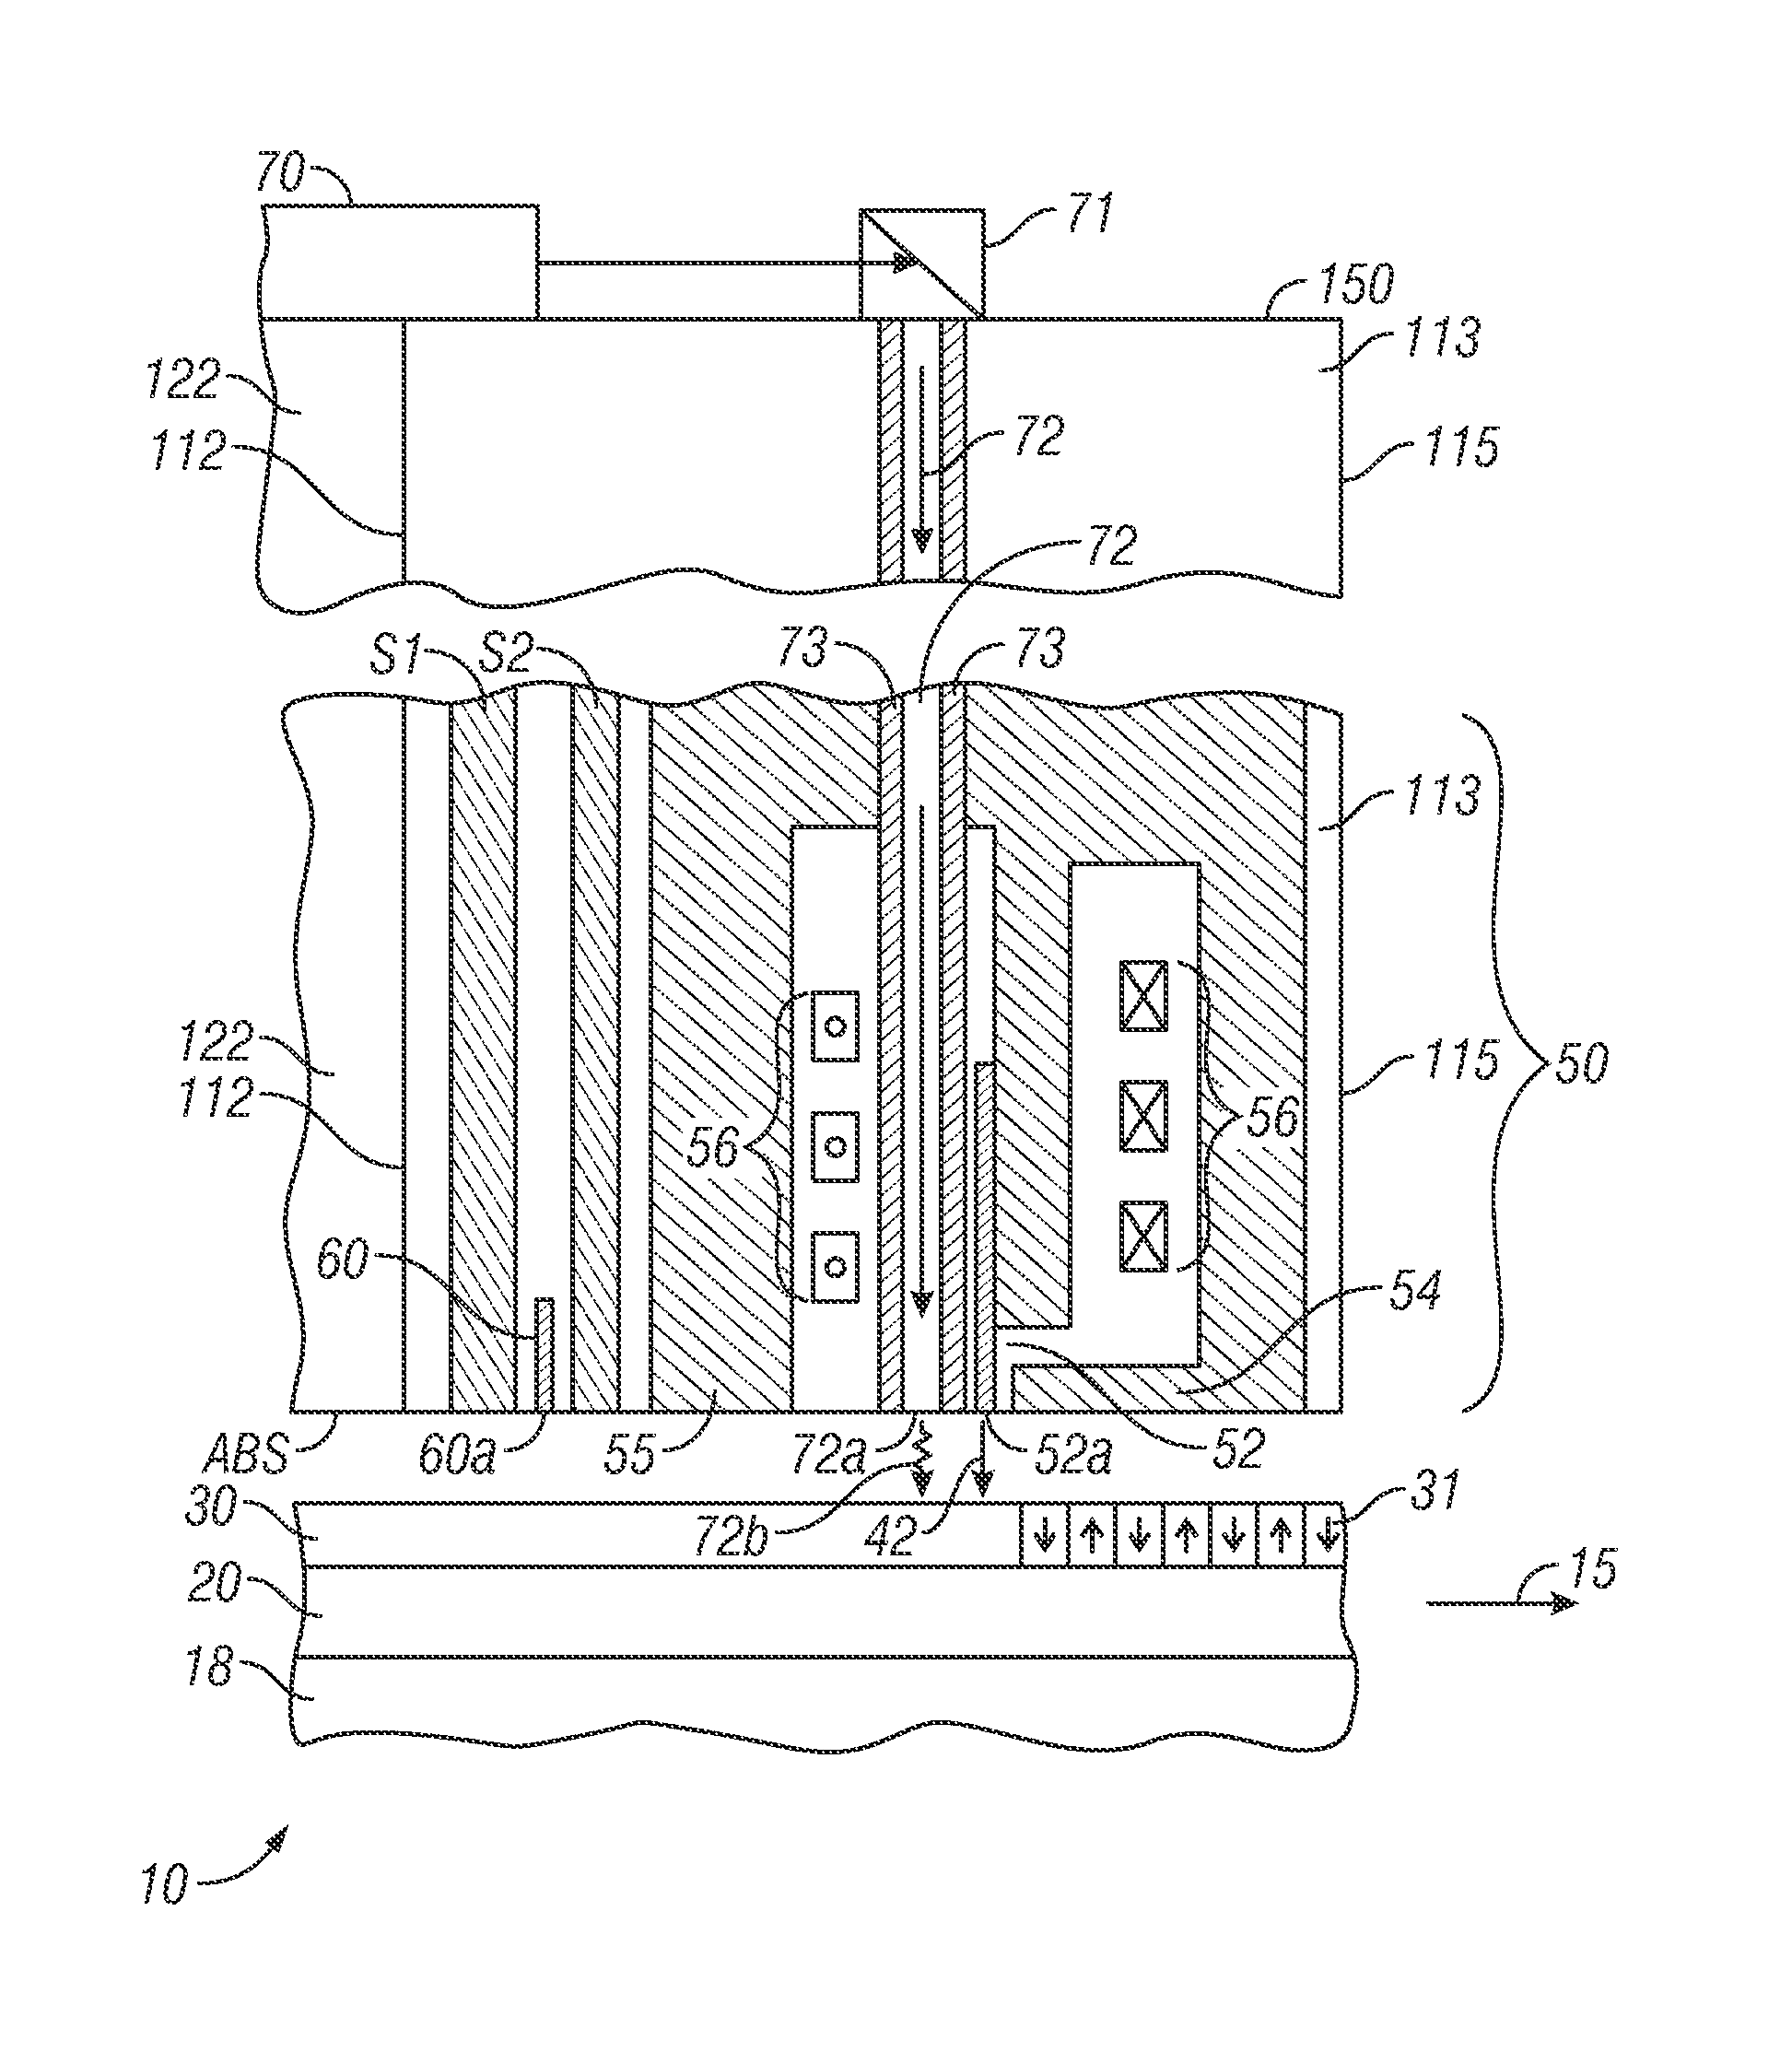 Magnetic recording disk drive with shingled writing and rectangular optical waveguide for wide-area thermal assistance